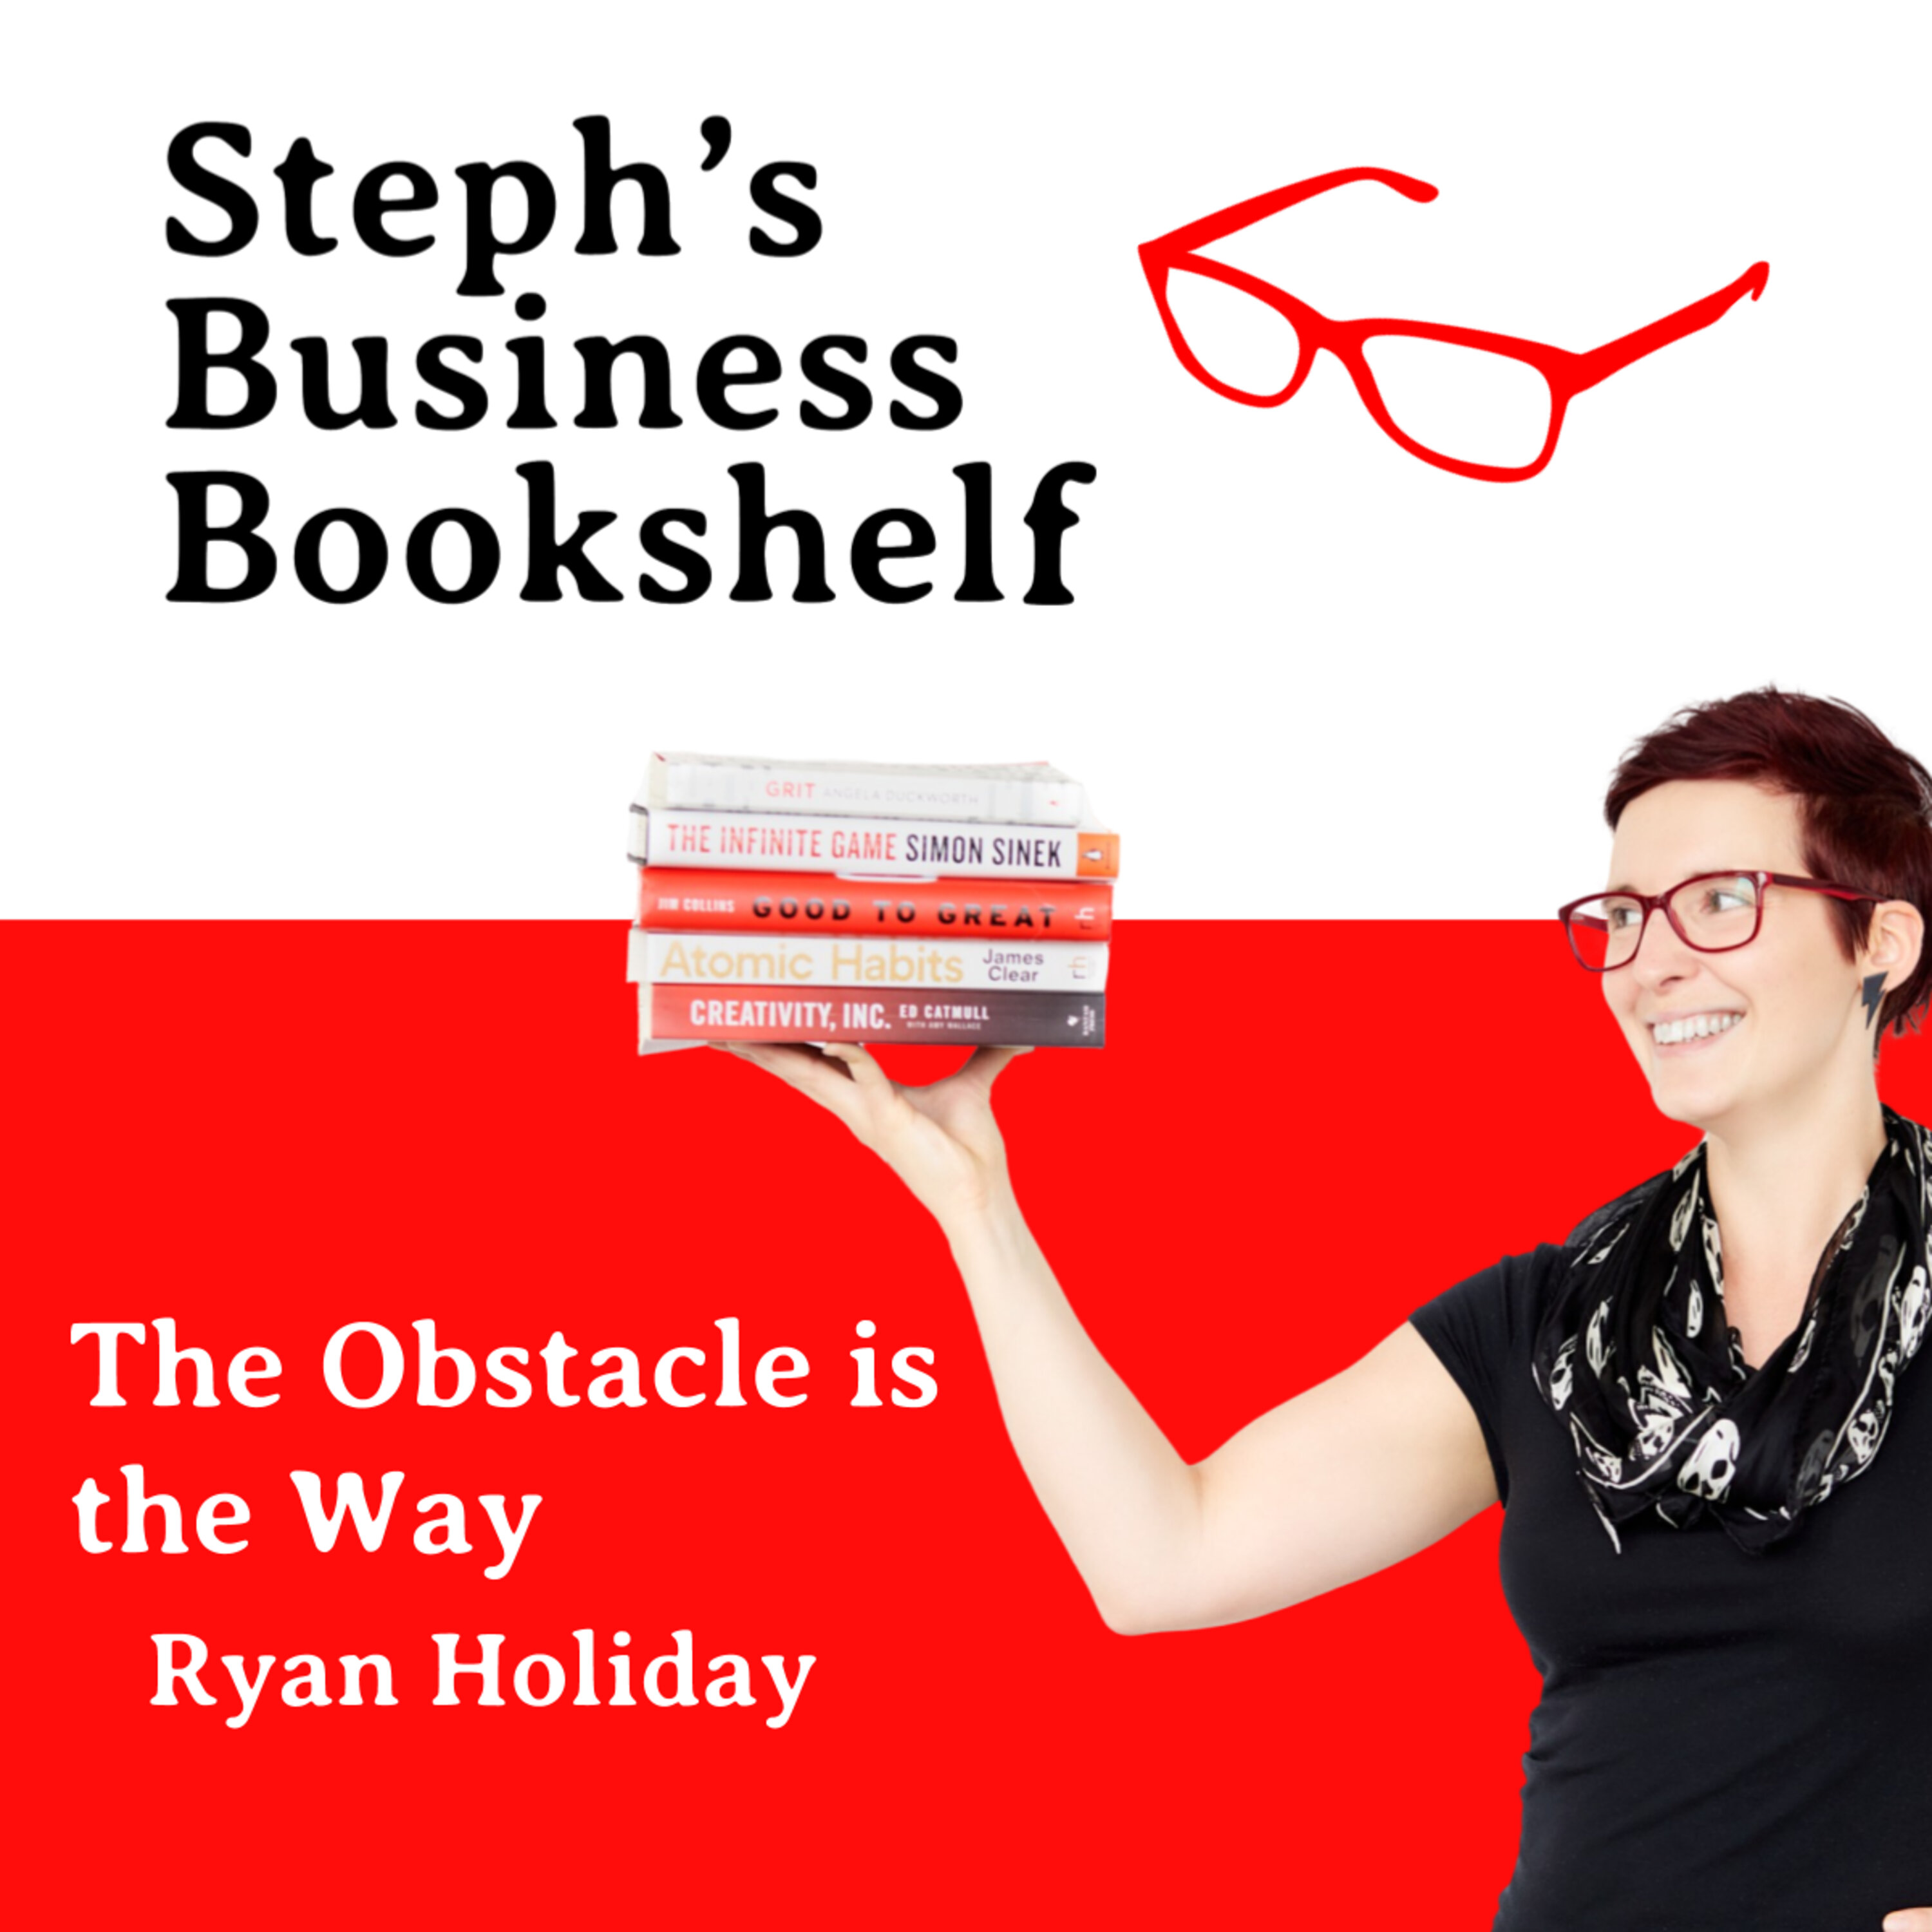 The Obstacle is the Way by Ryan Holiday: Why you need to domesticate your emotions and act Image